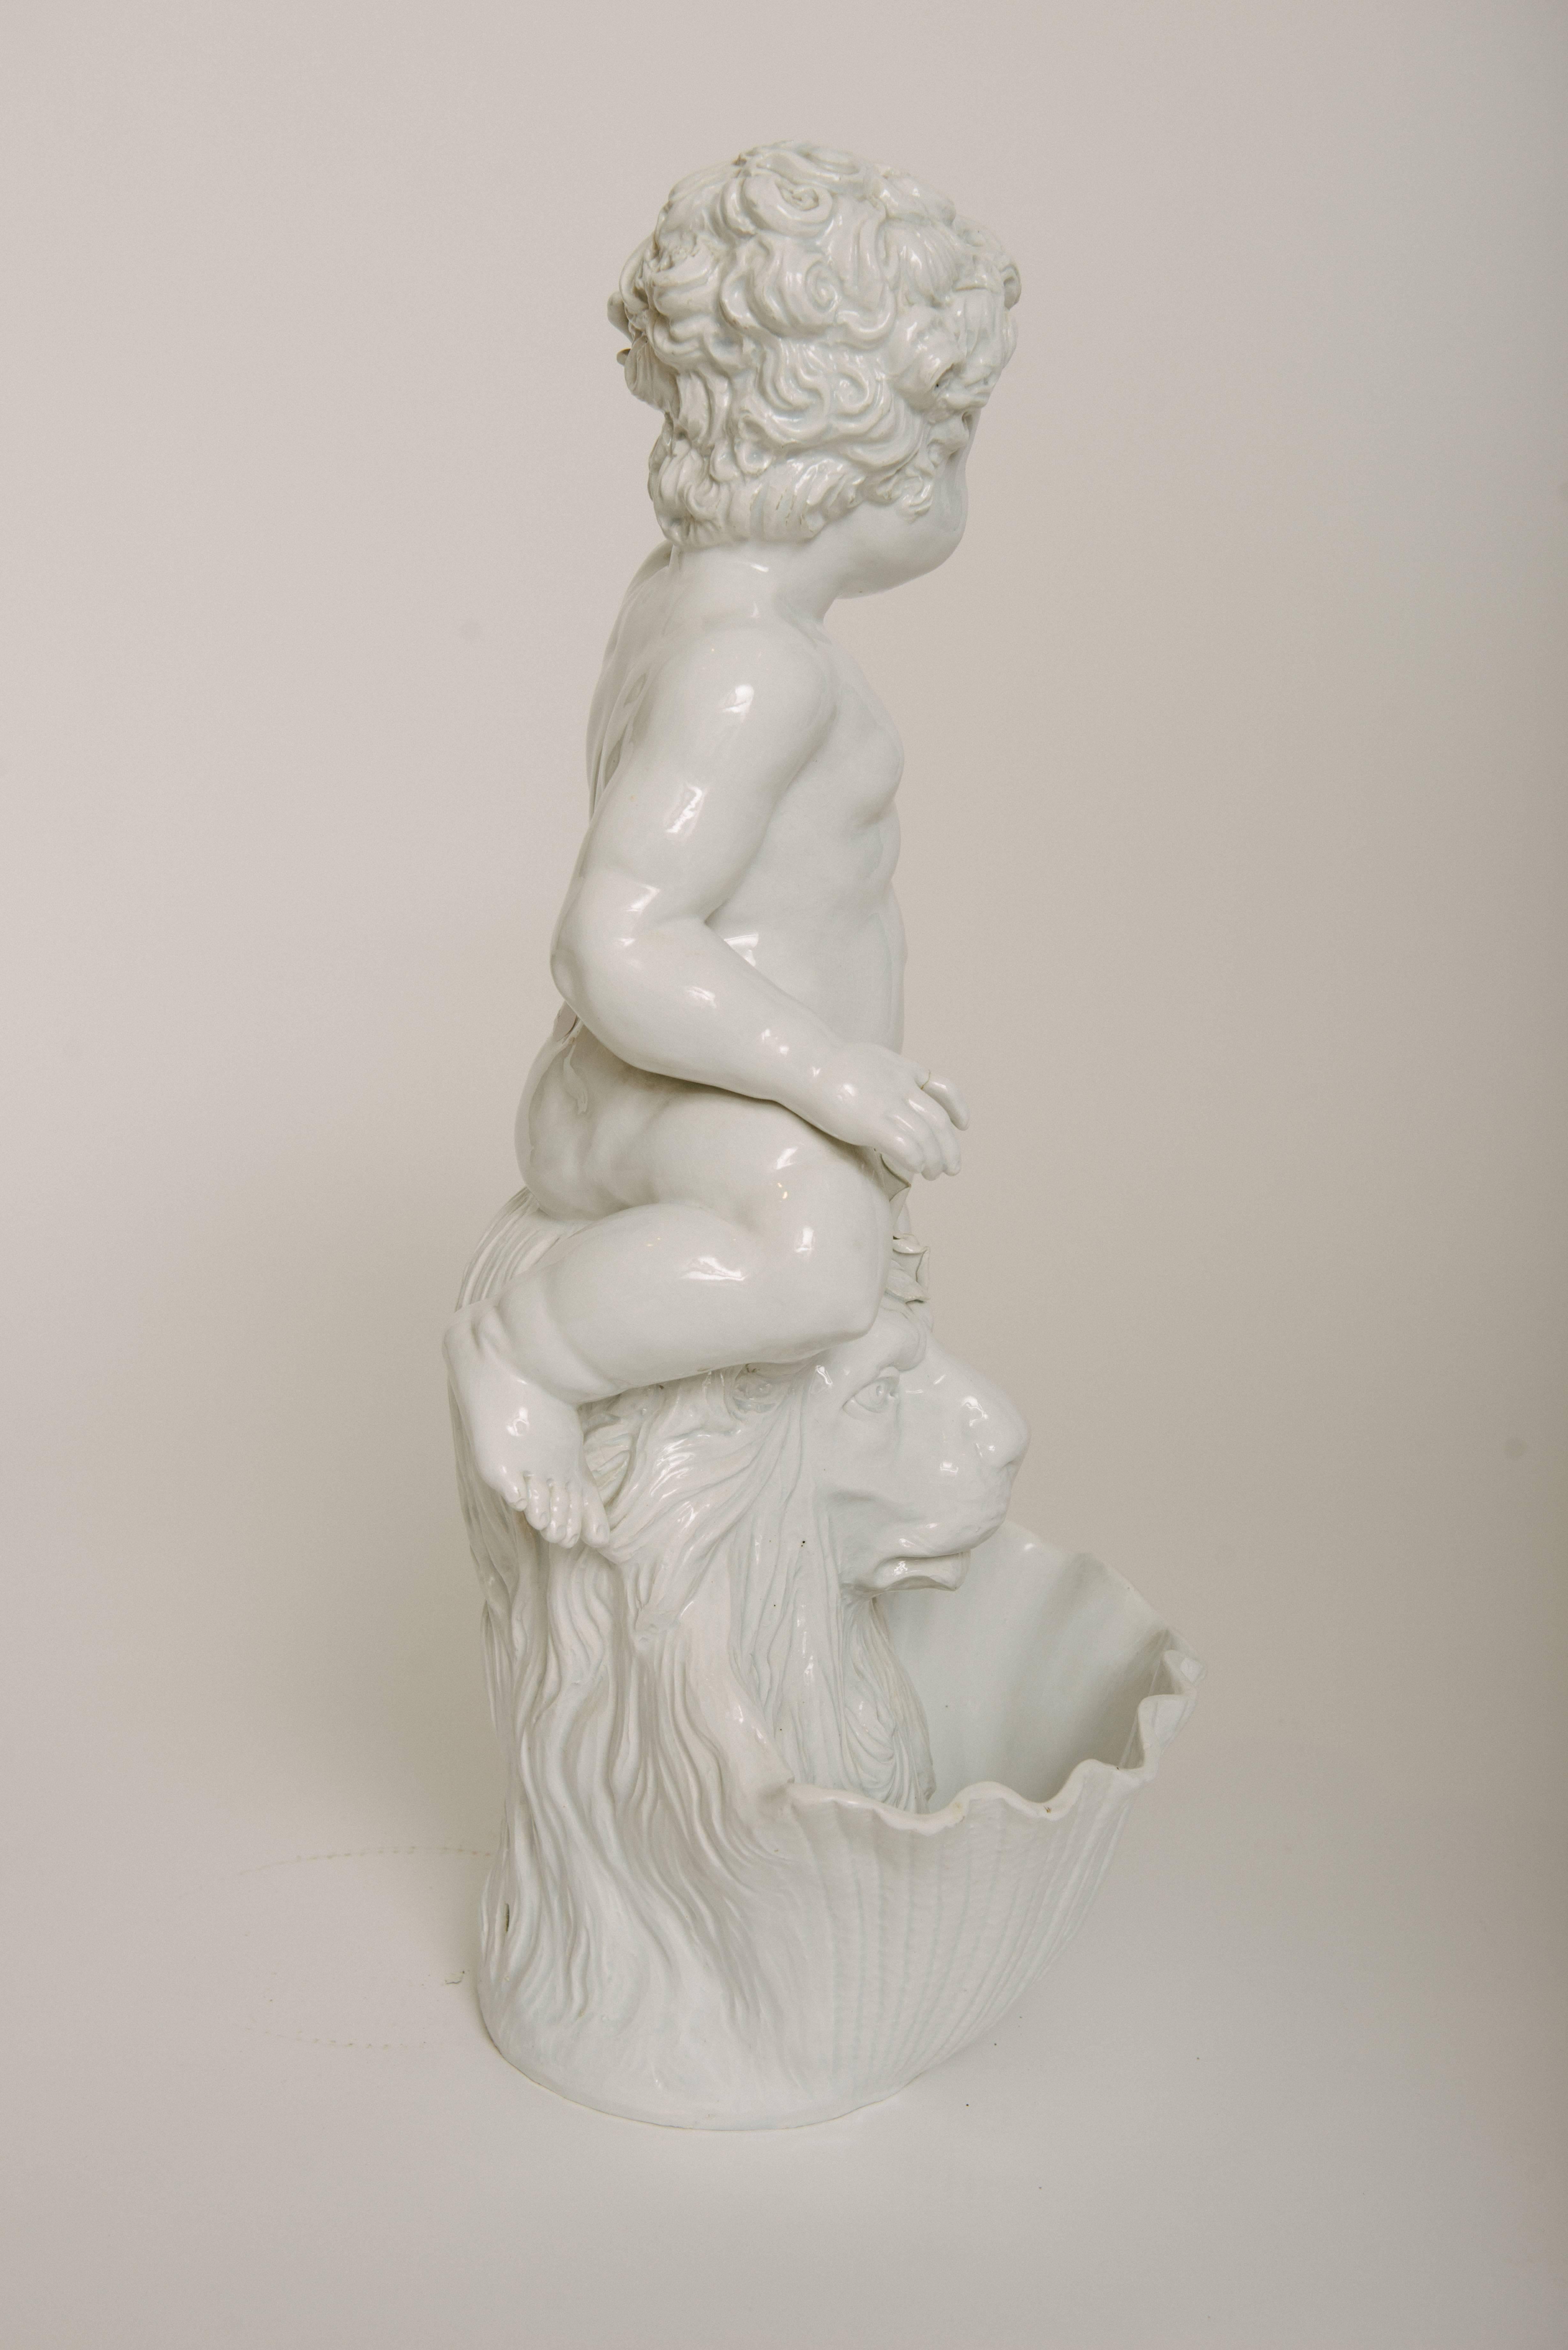 A vintage Italian Blanc De Chine fountain of a beautiful putti sitting atop a lion's bust bowl. This piece is a wonderful decorative centerpiece on its own.